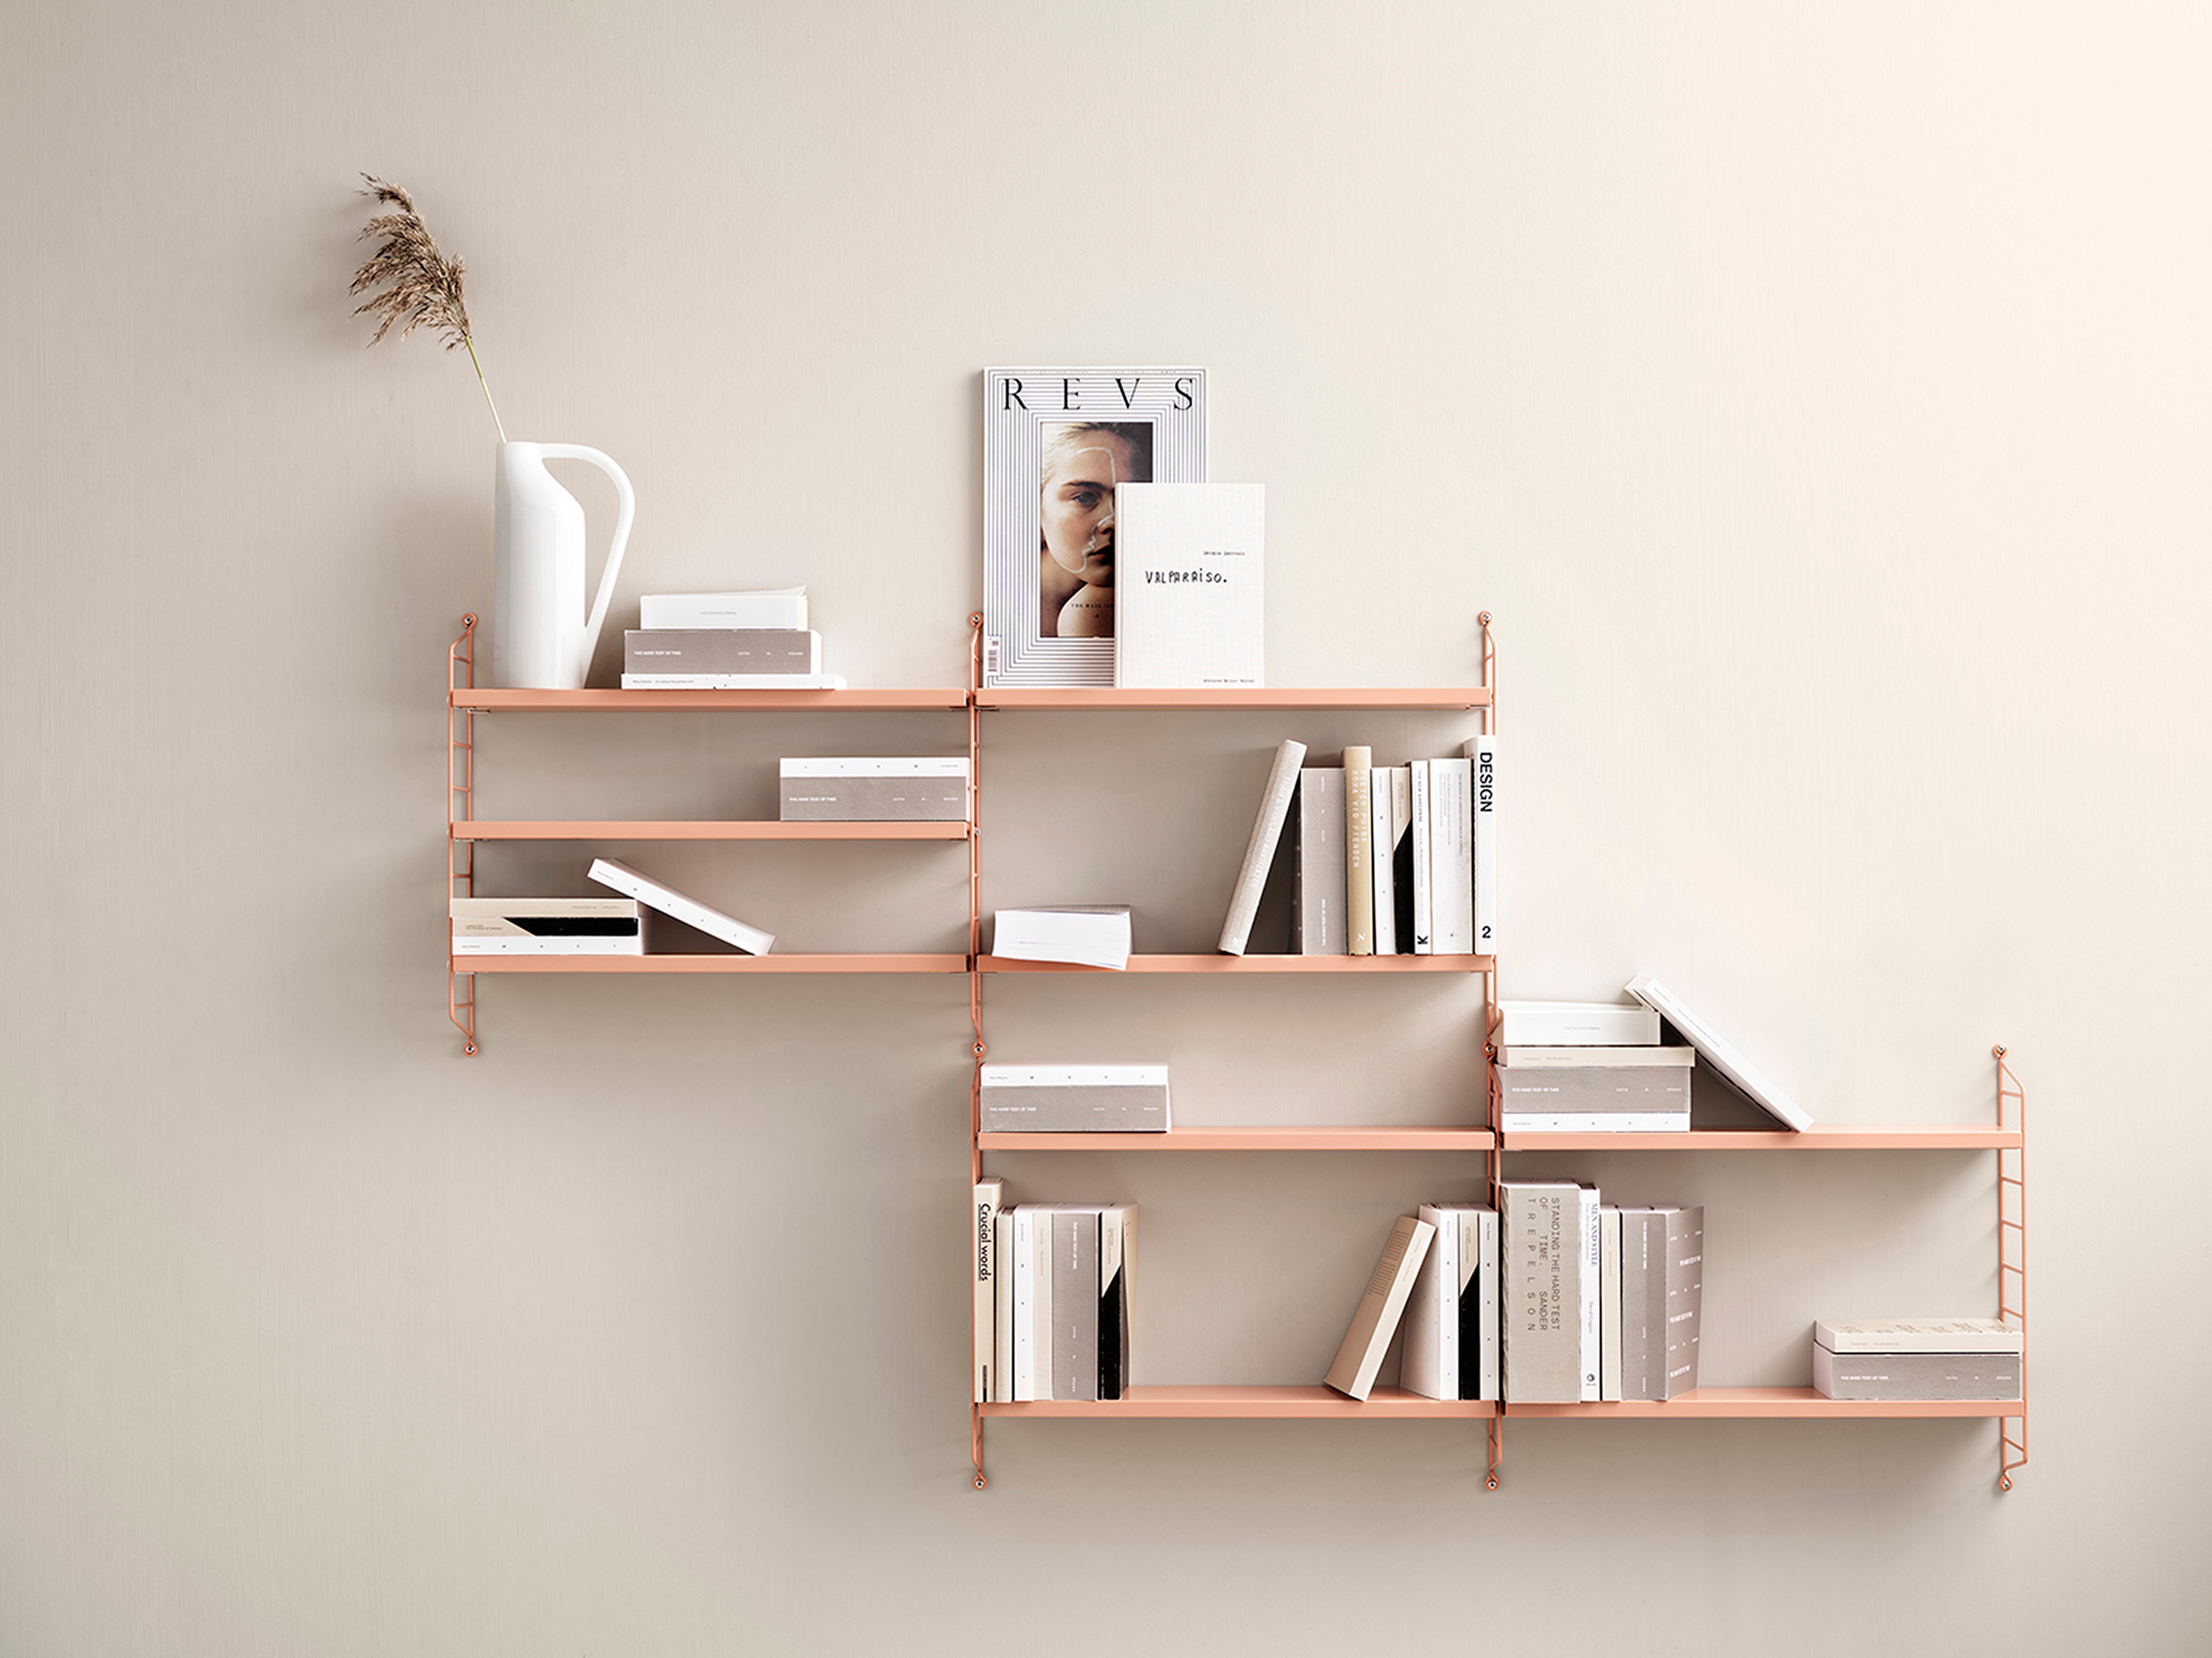 The String Pocket shelves can be a great way to add colour to a plain wall